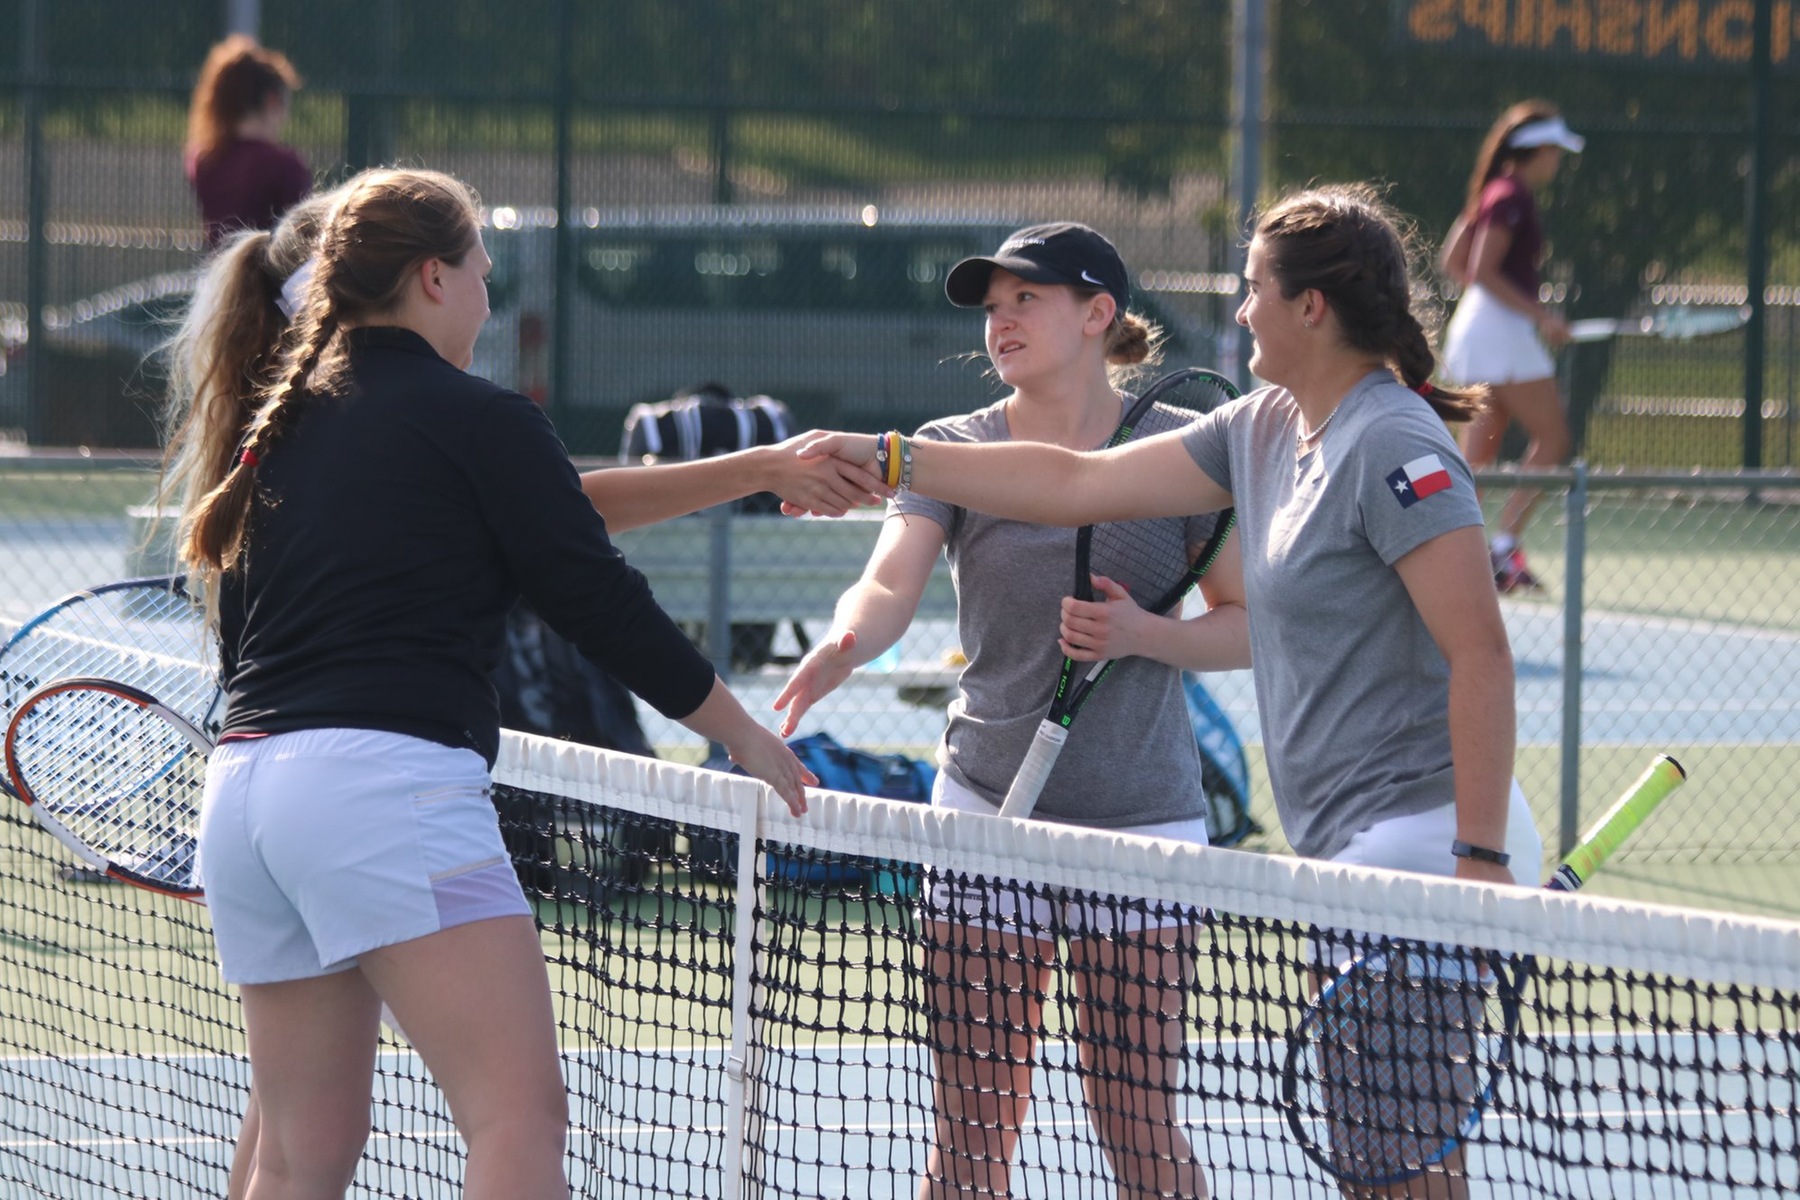 Women's Tennis Finishes Second in the SCAC Championship Tournament